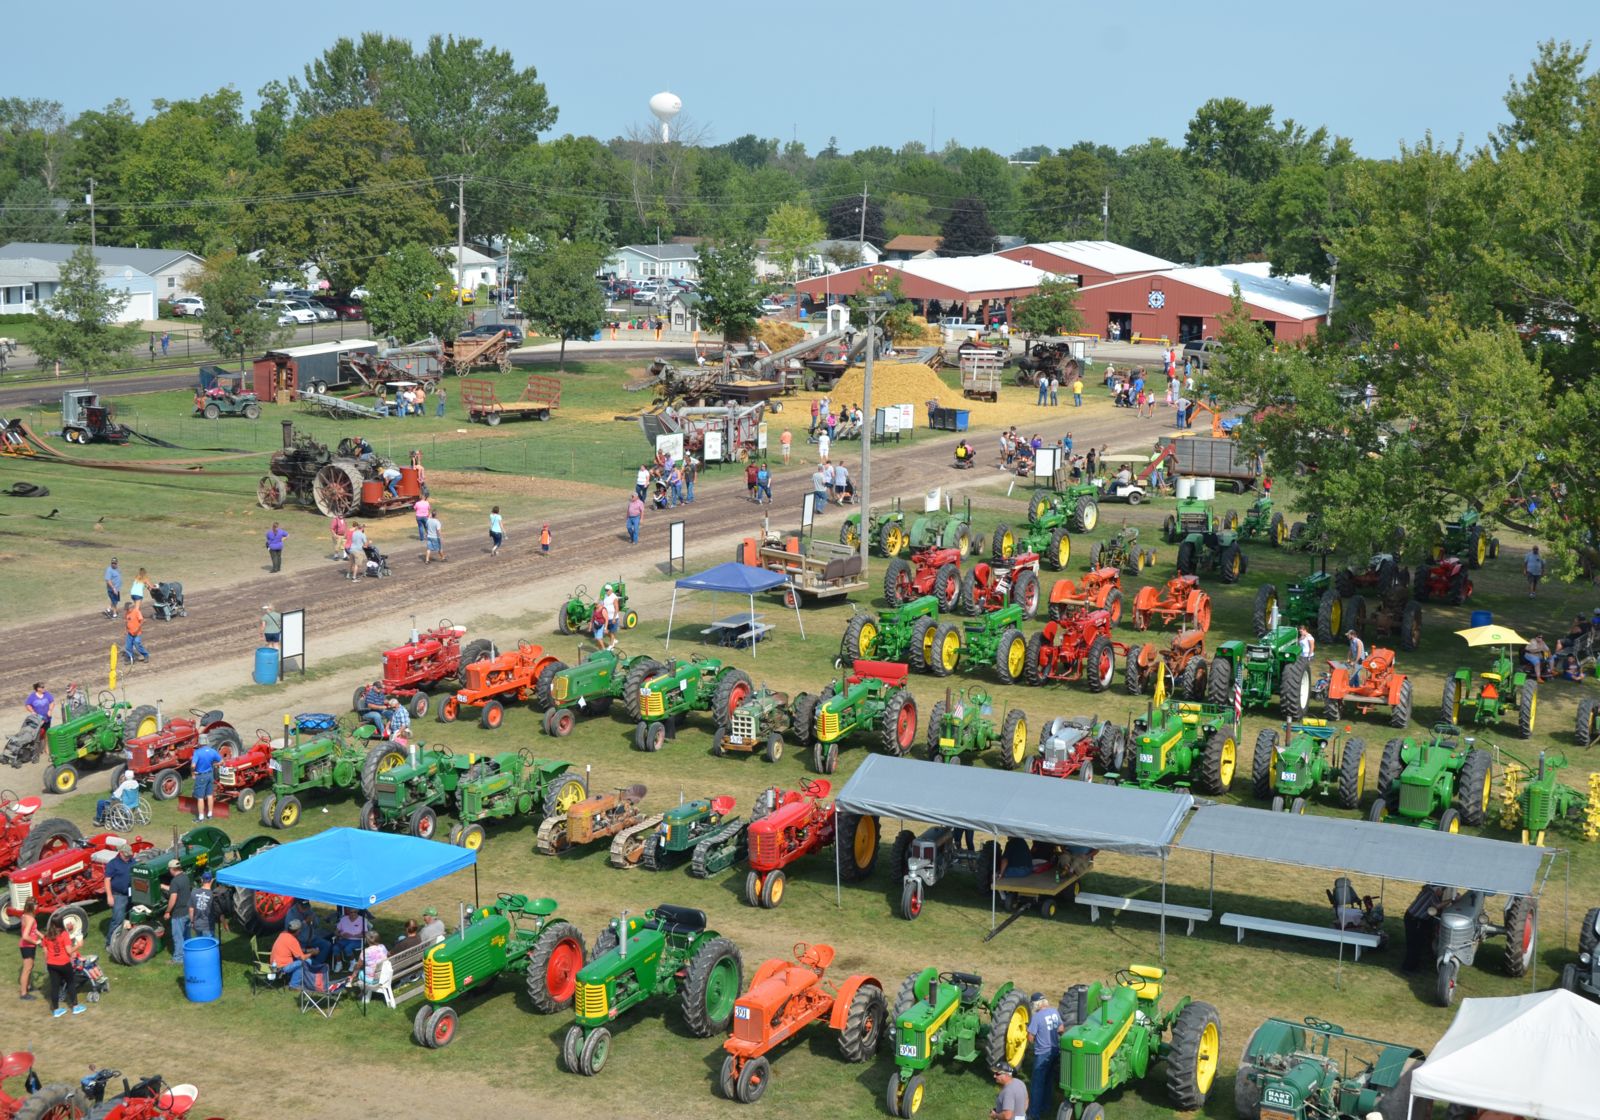 Visit the Reunion Midwest Old Settlers & Threshers Association